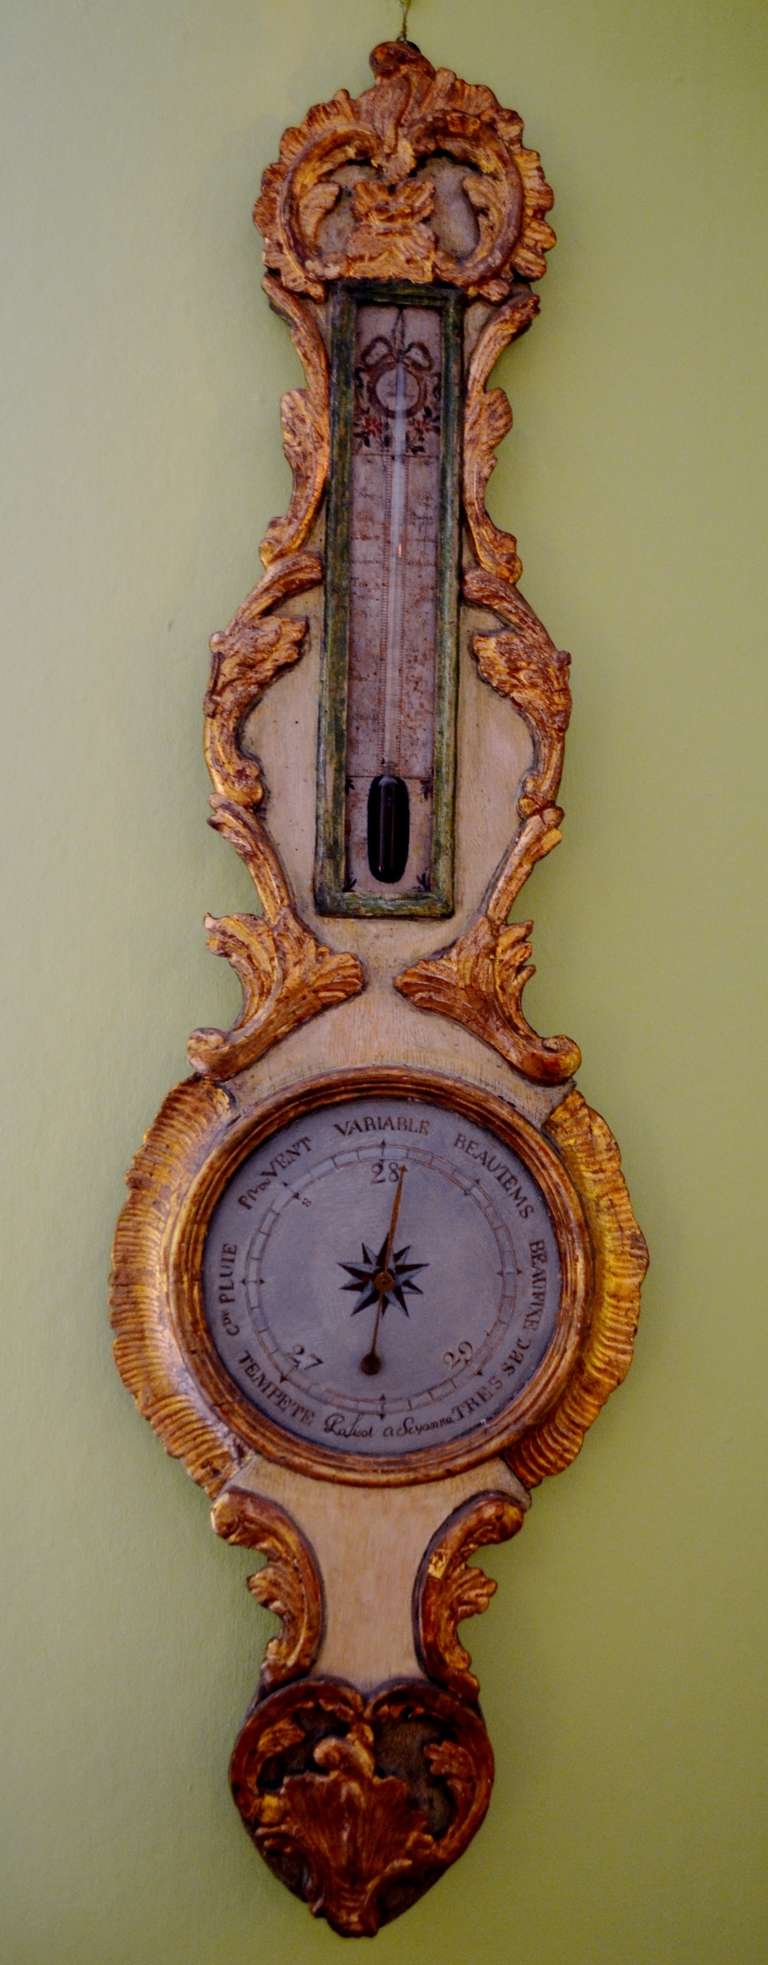 Incredible French Rococo Barometer. Beautifully carved, painted and gilded.